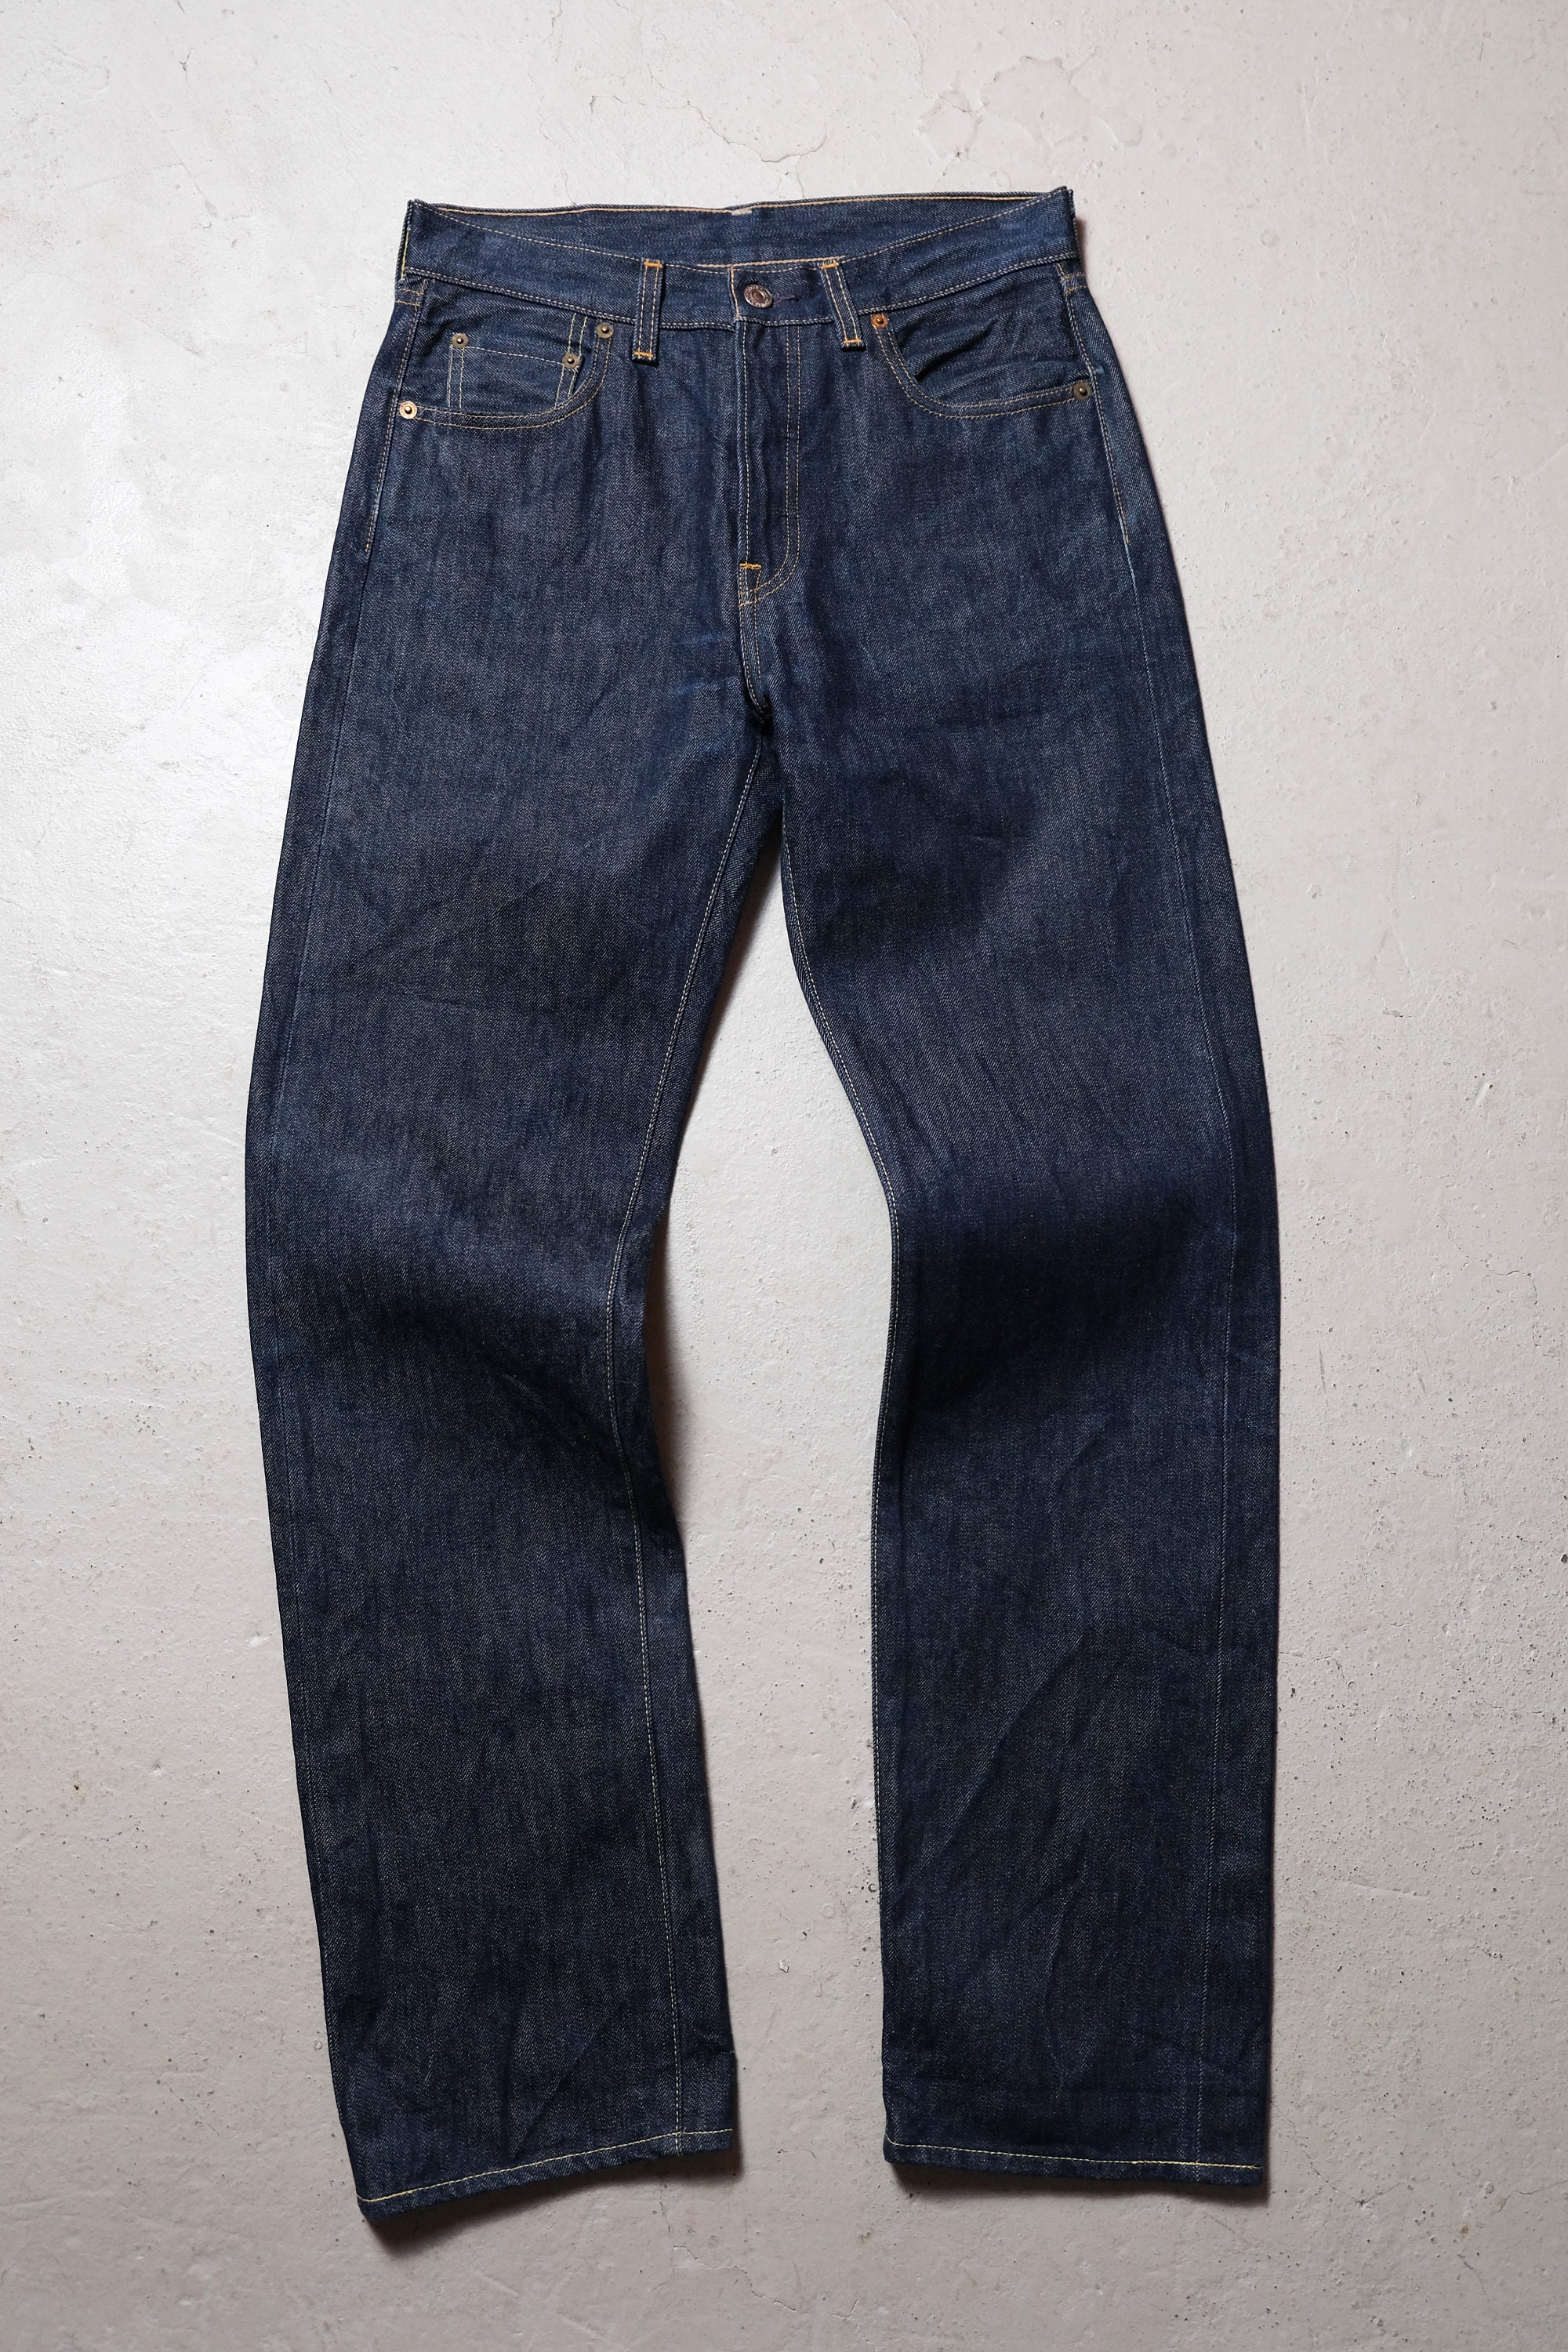 Levi's LVC 1955 Reproduction Jeans, Cone Denim with Red Line Selvedge, 1996